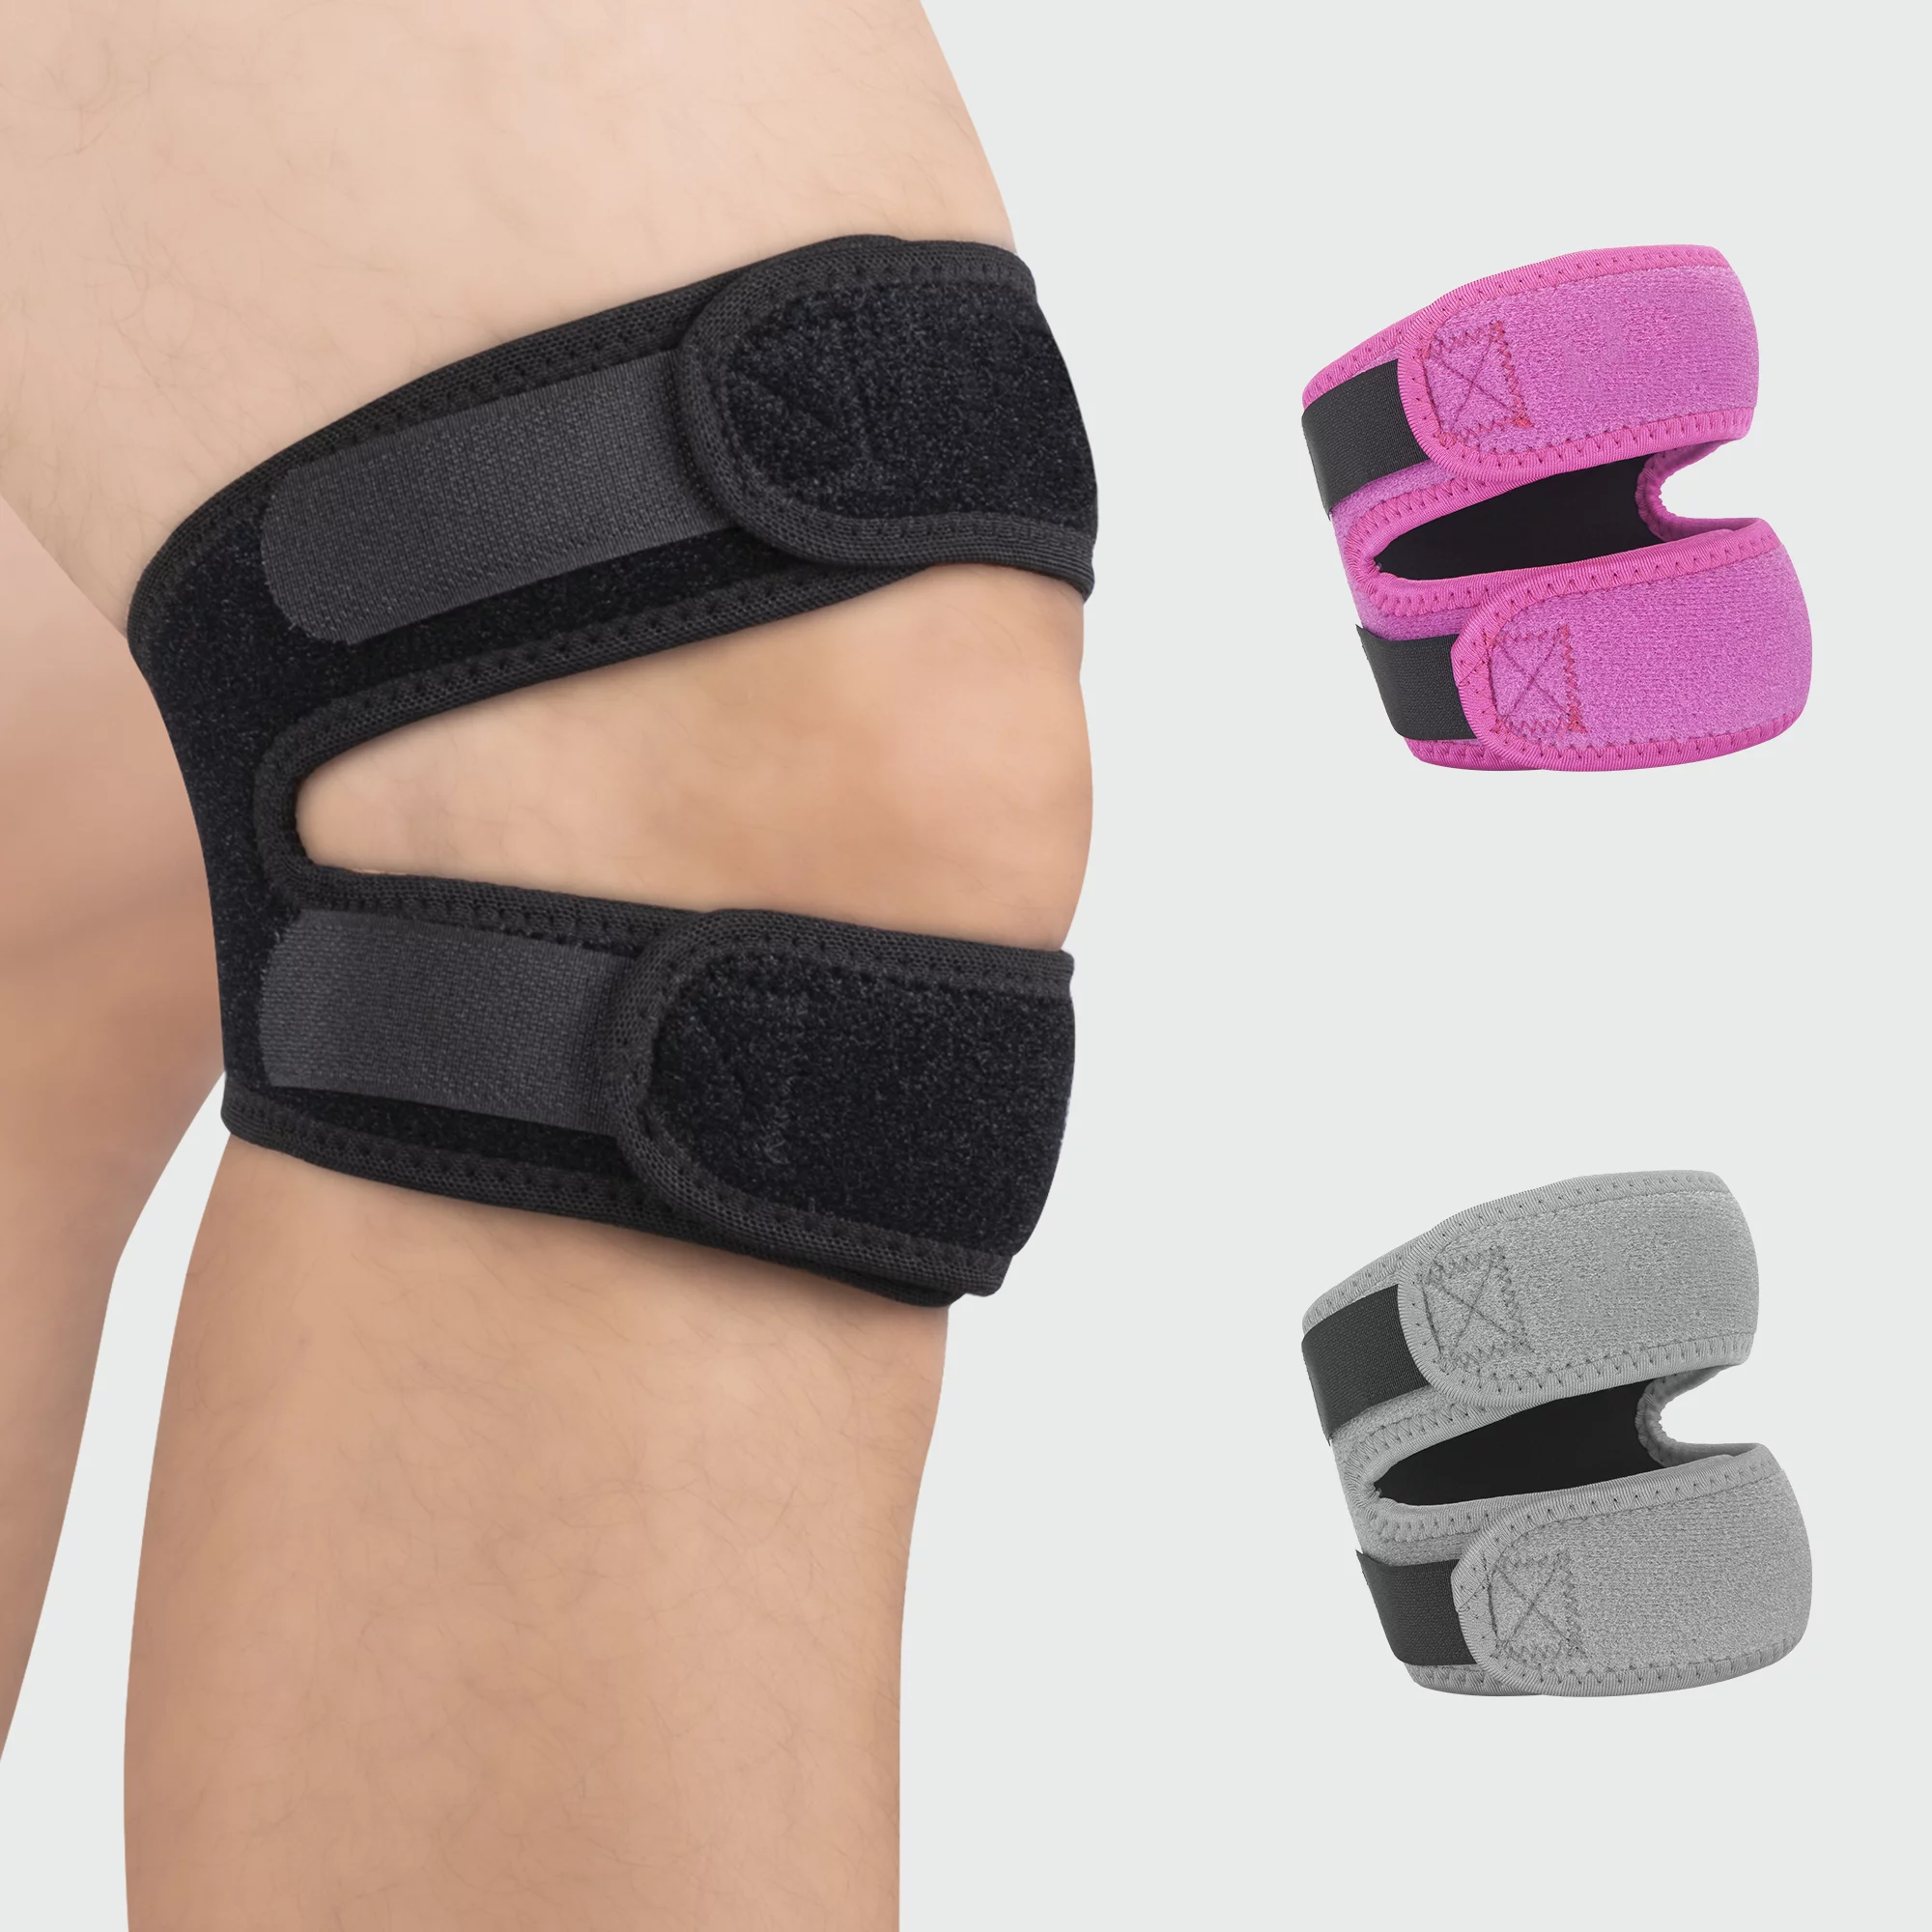 Adjustable Knee Support - with Velcro Enclosures - Black - Neoprene  Stretchable Material